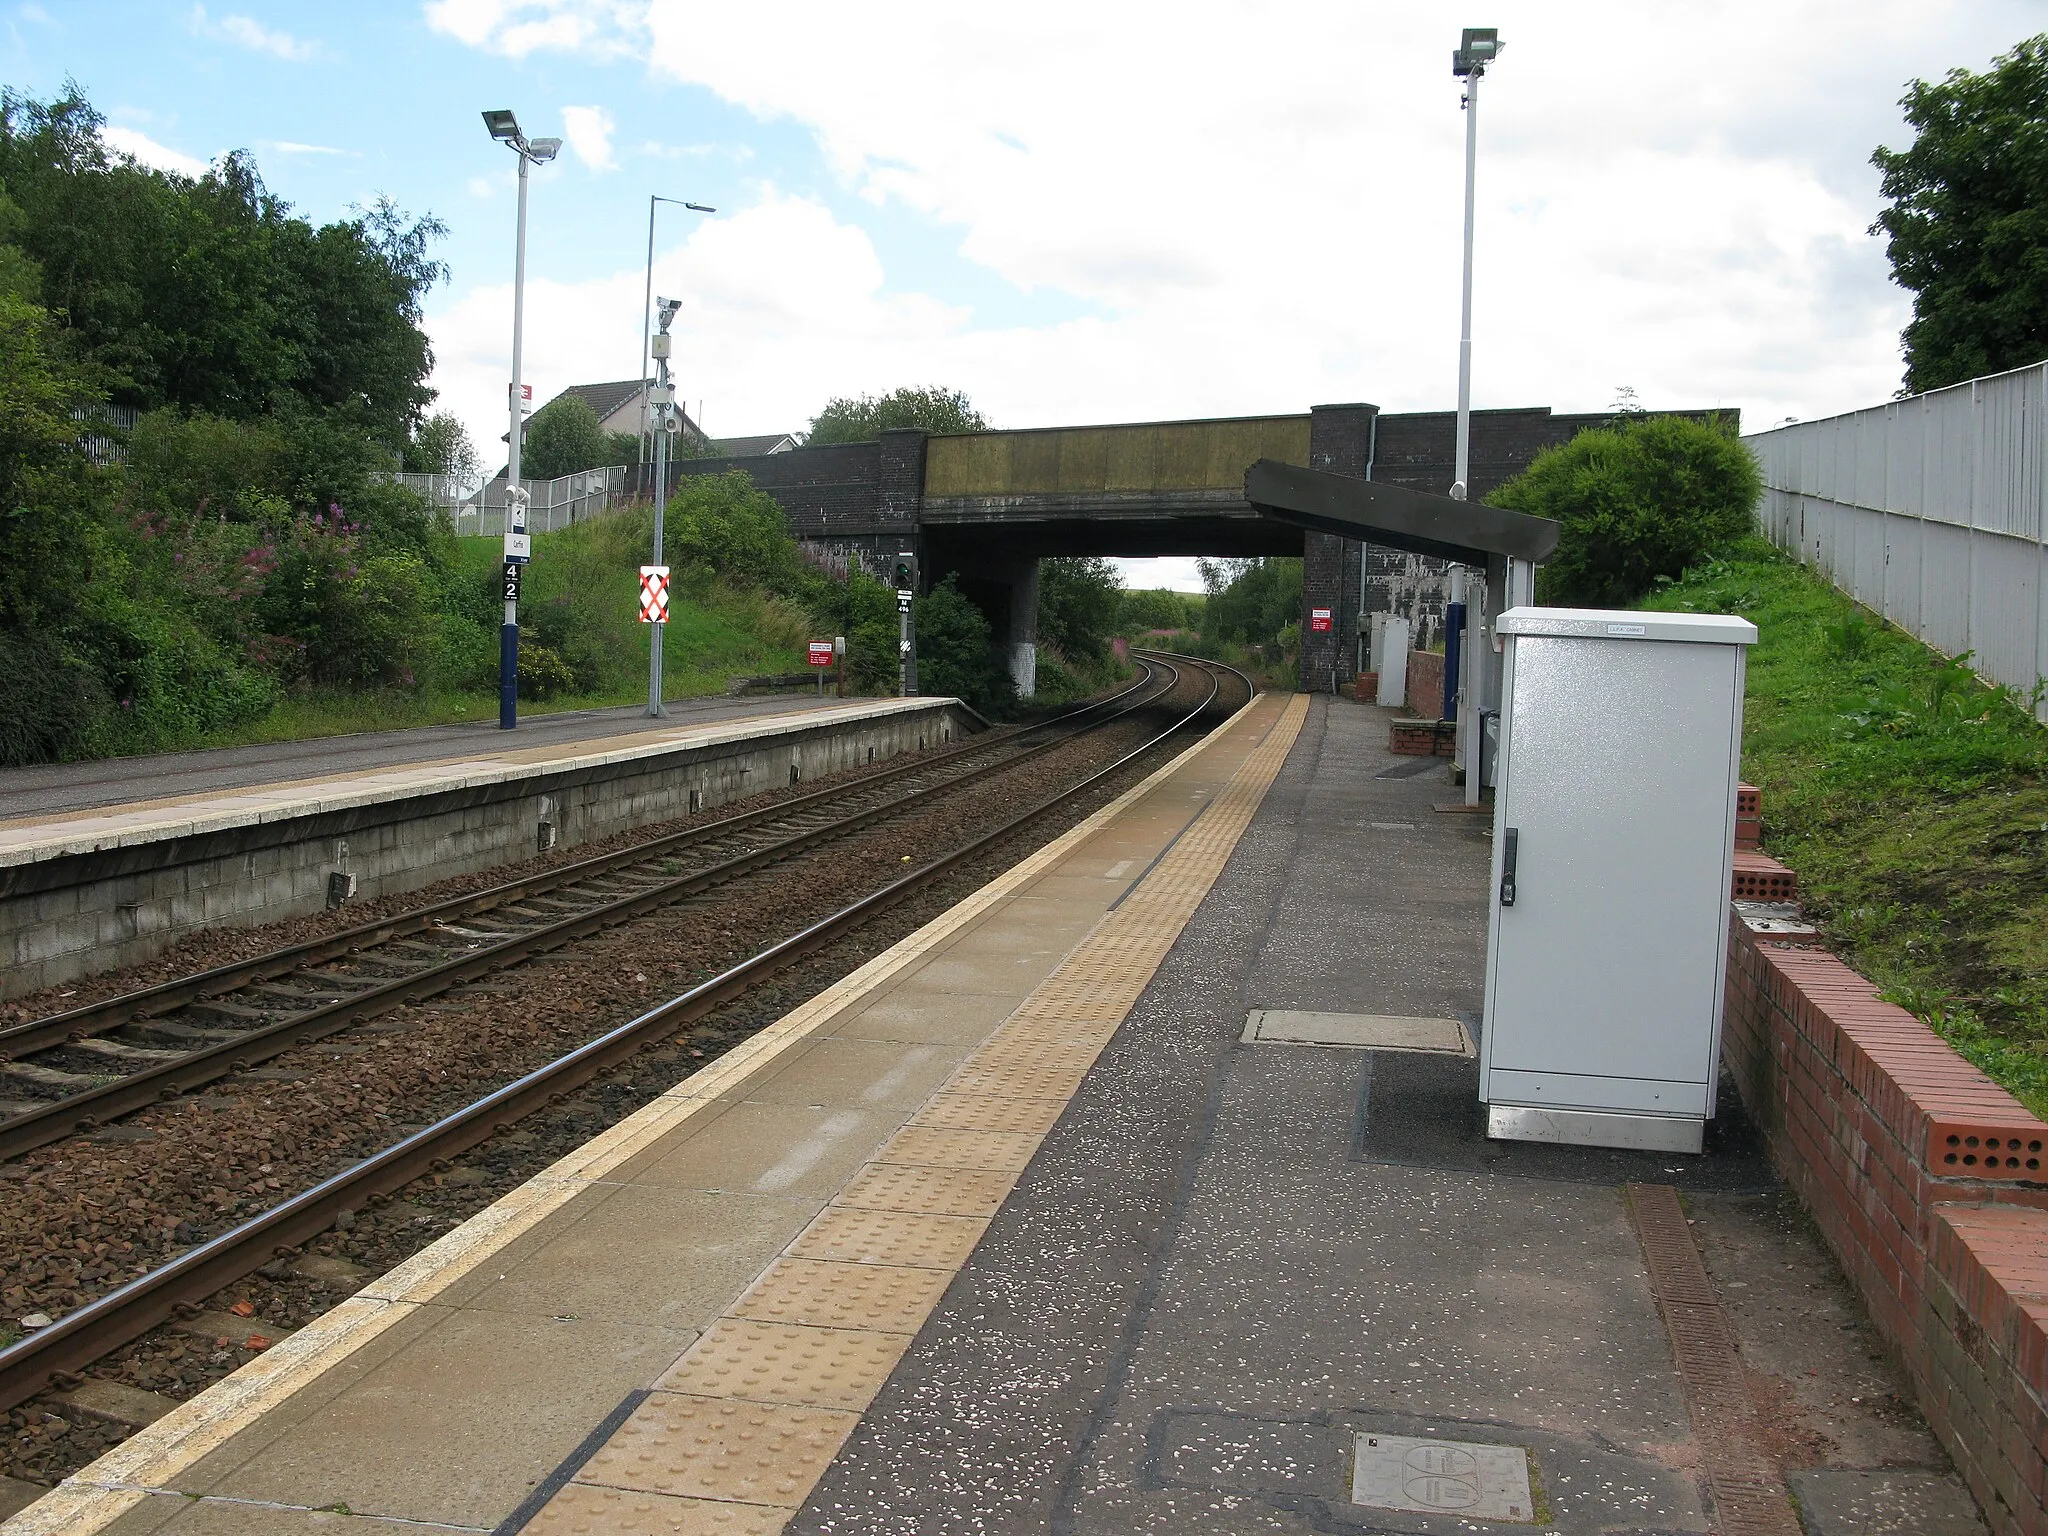 Photo showing: Carfin railway station, looking ESE,
Data from Geograph:
Description: View from platform 1 at Carfin railway station, looking roughly ESE towards Edinburgh Waverley.
ICBM: 55.804197235085, -3.9559364946415
Location: (about 2 km from) near to Newarthill, North Lanarkshire, Great Britain.